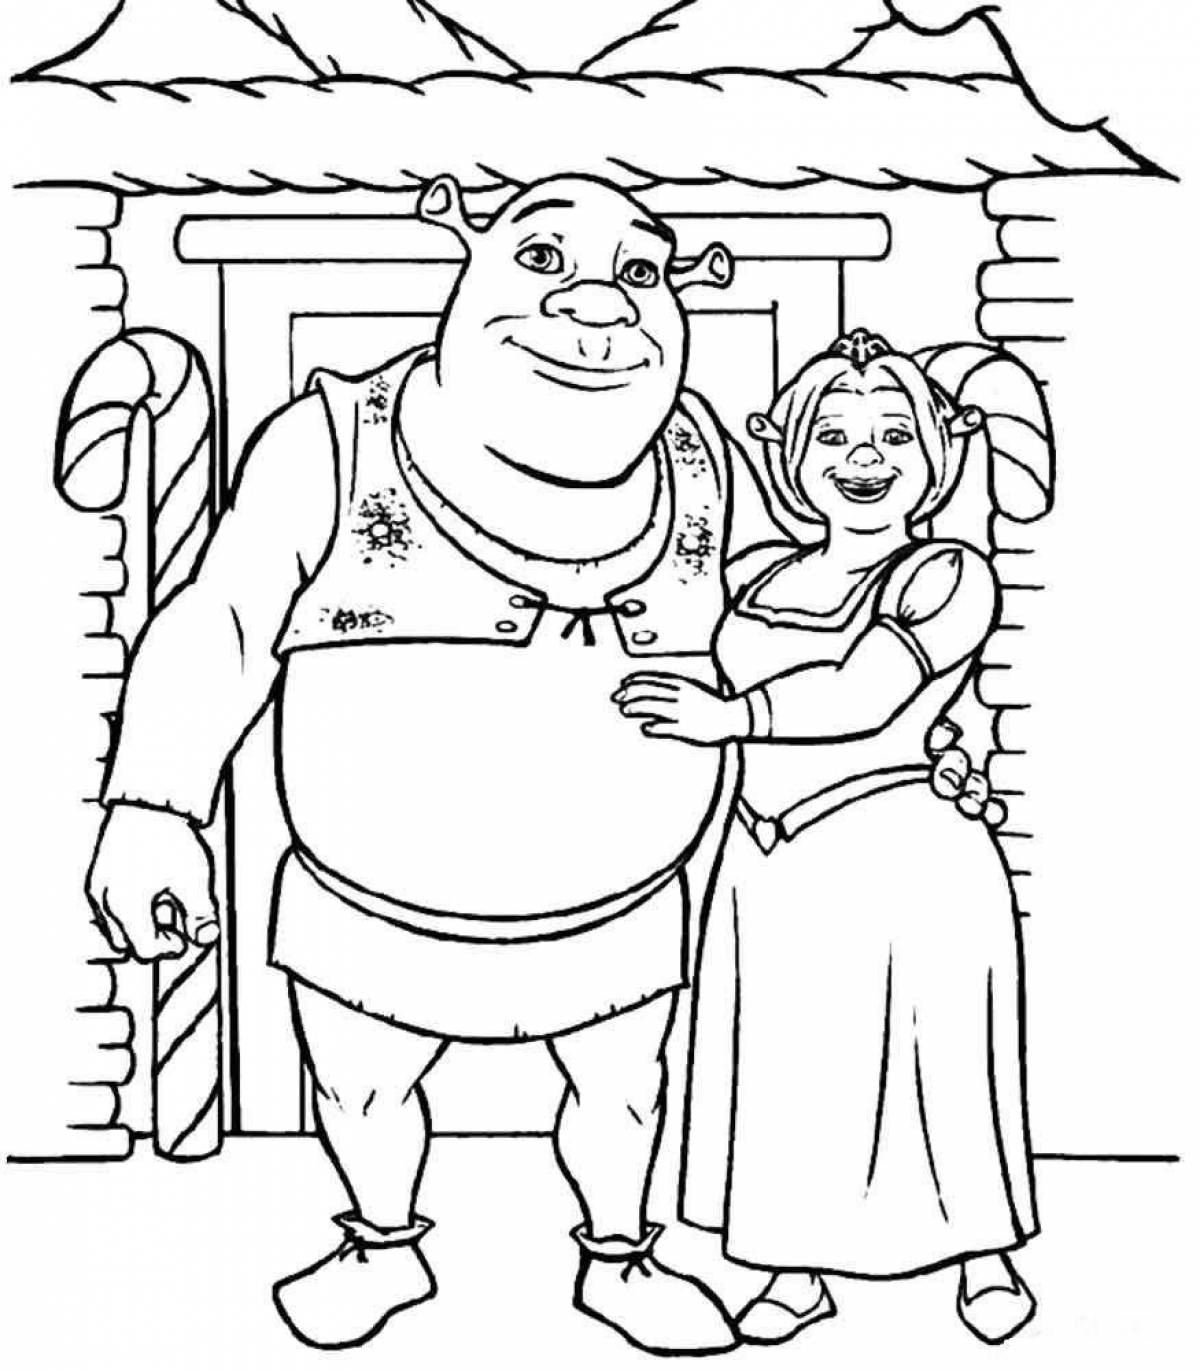 Outstanding shrek coloring page